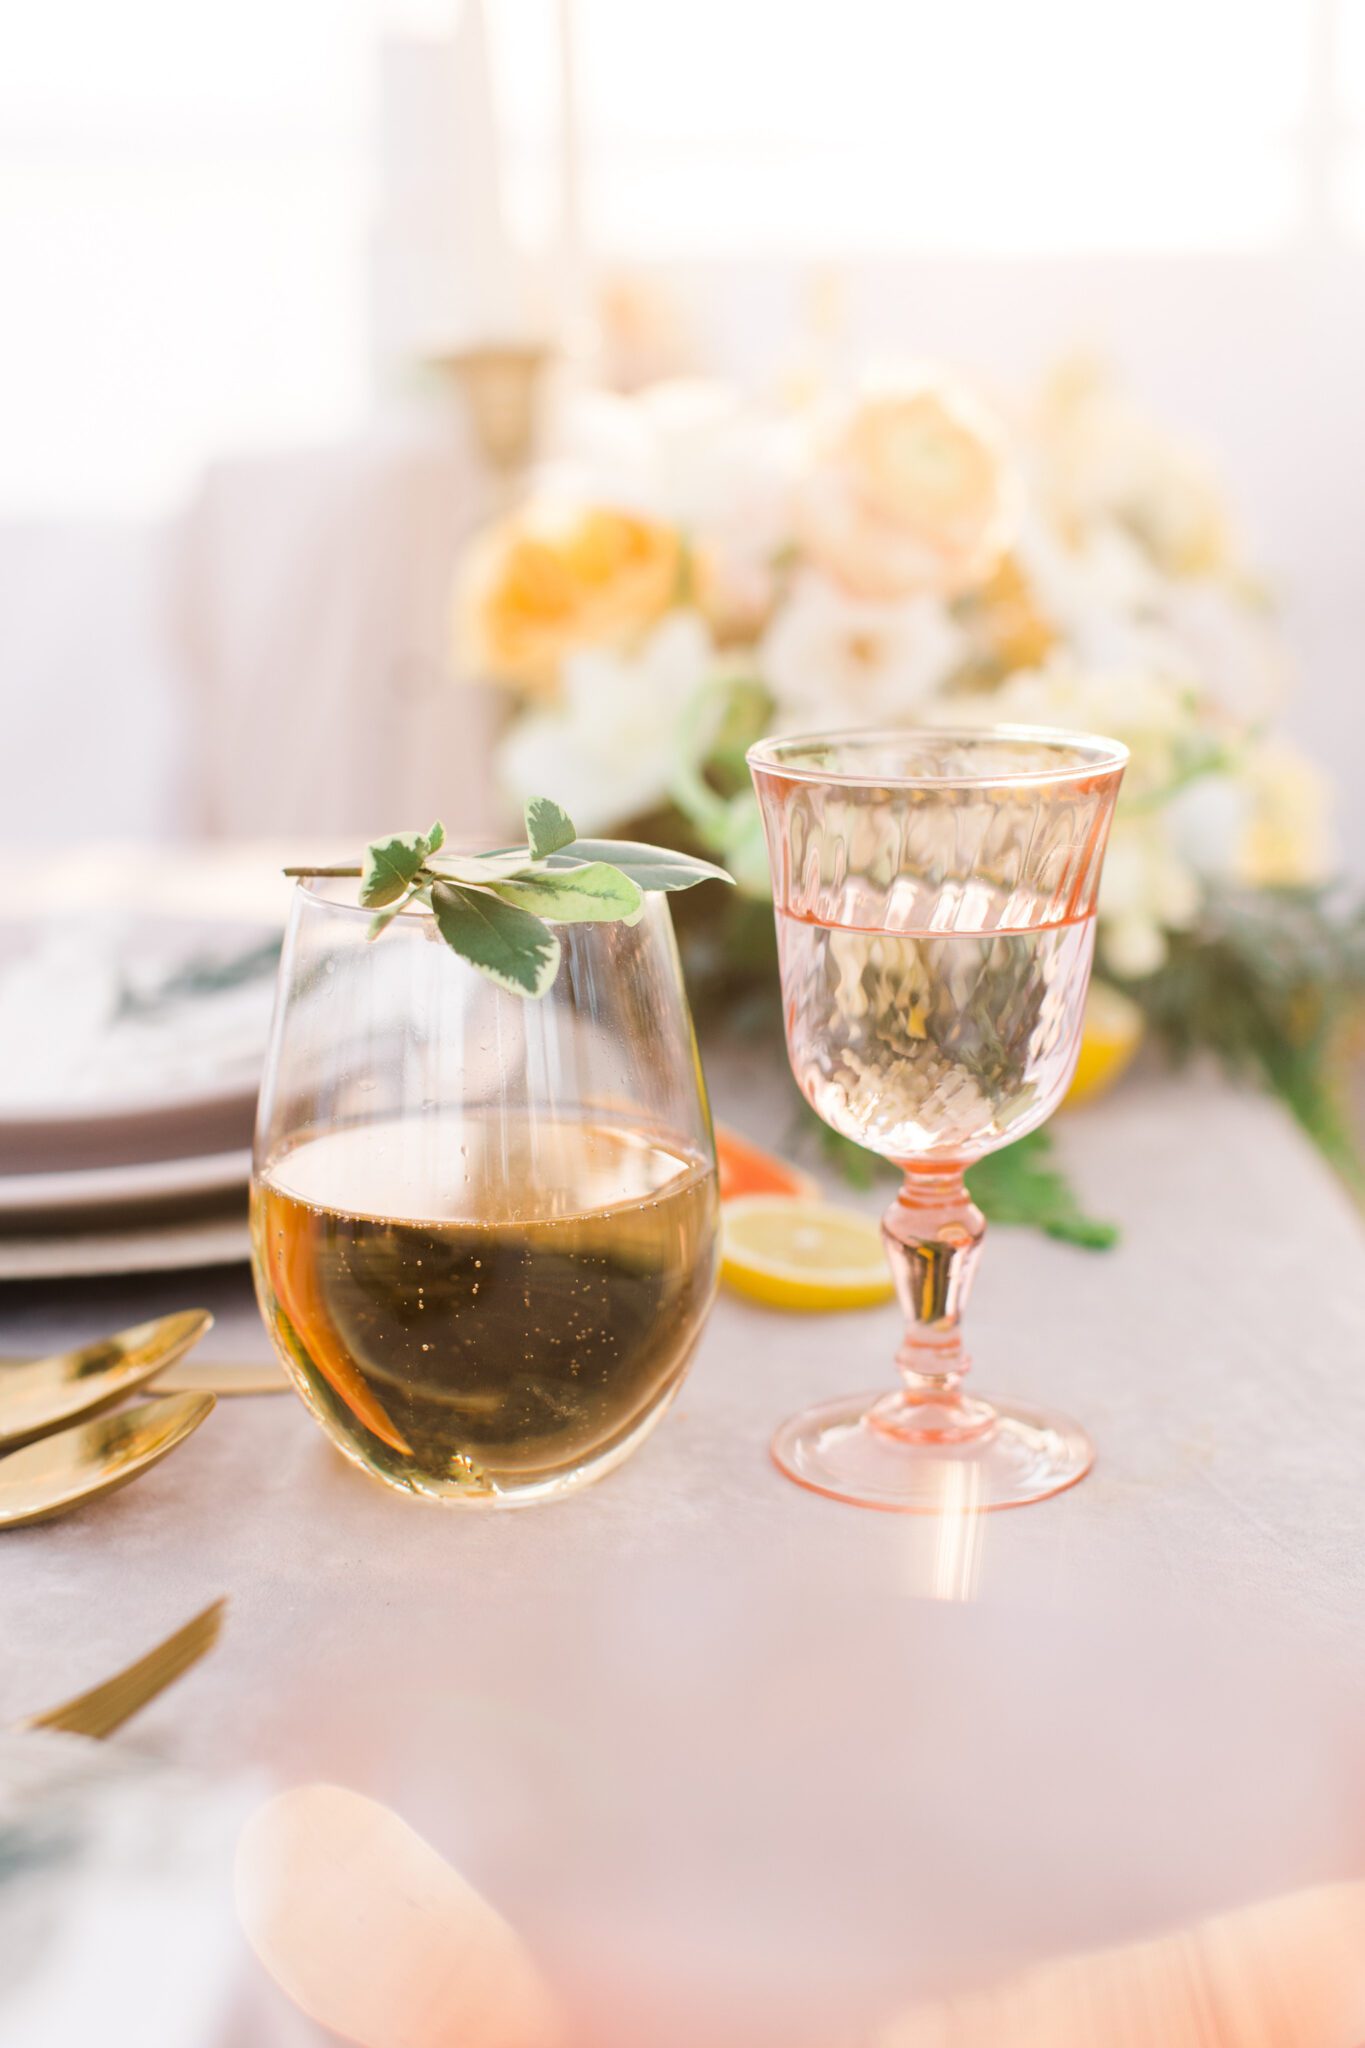 Summer tented wedding reception ideas, yellow and peach spring inspired floral arrangements, custom pink glassware, plates, and stemware, captured by Kayla Lynn Photography